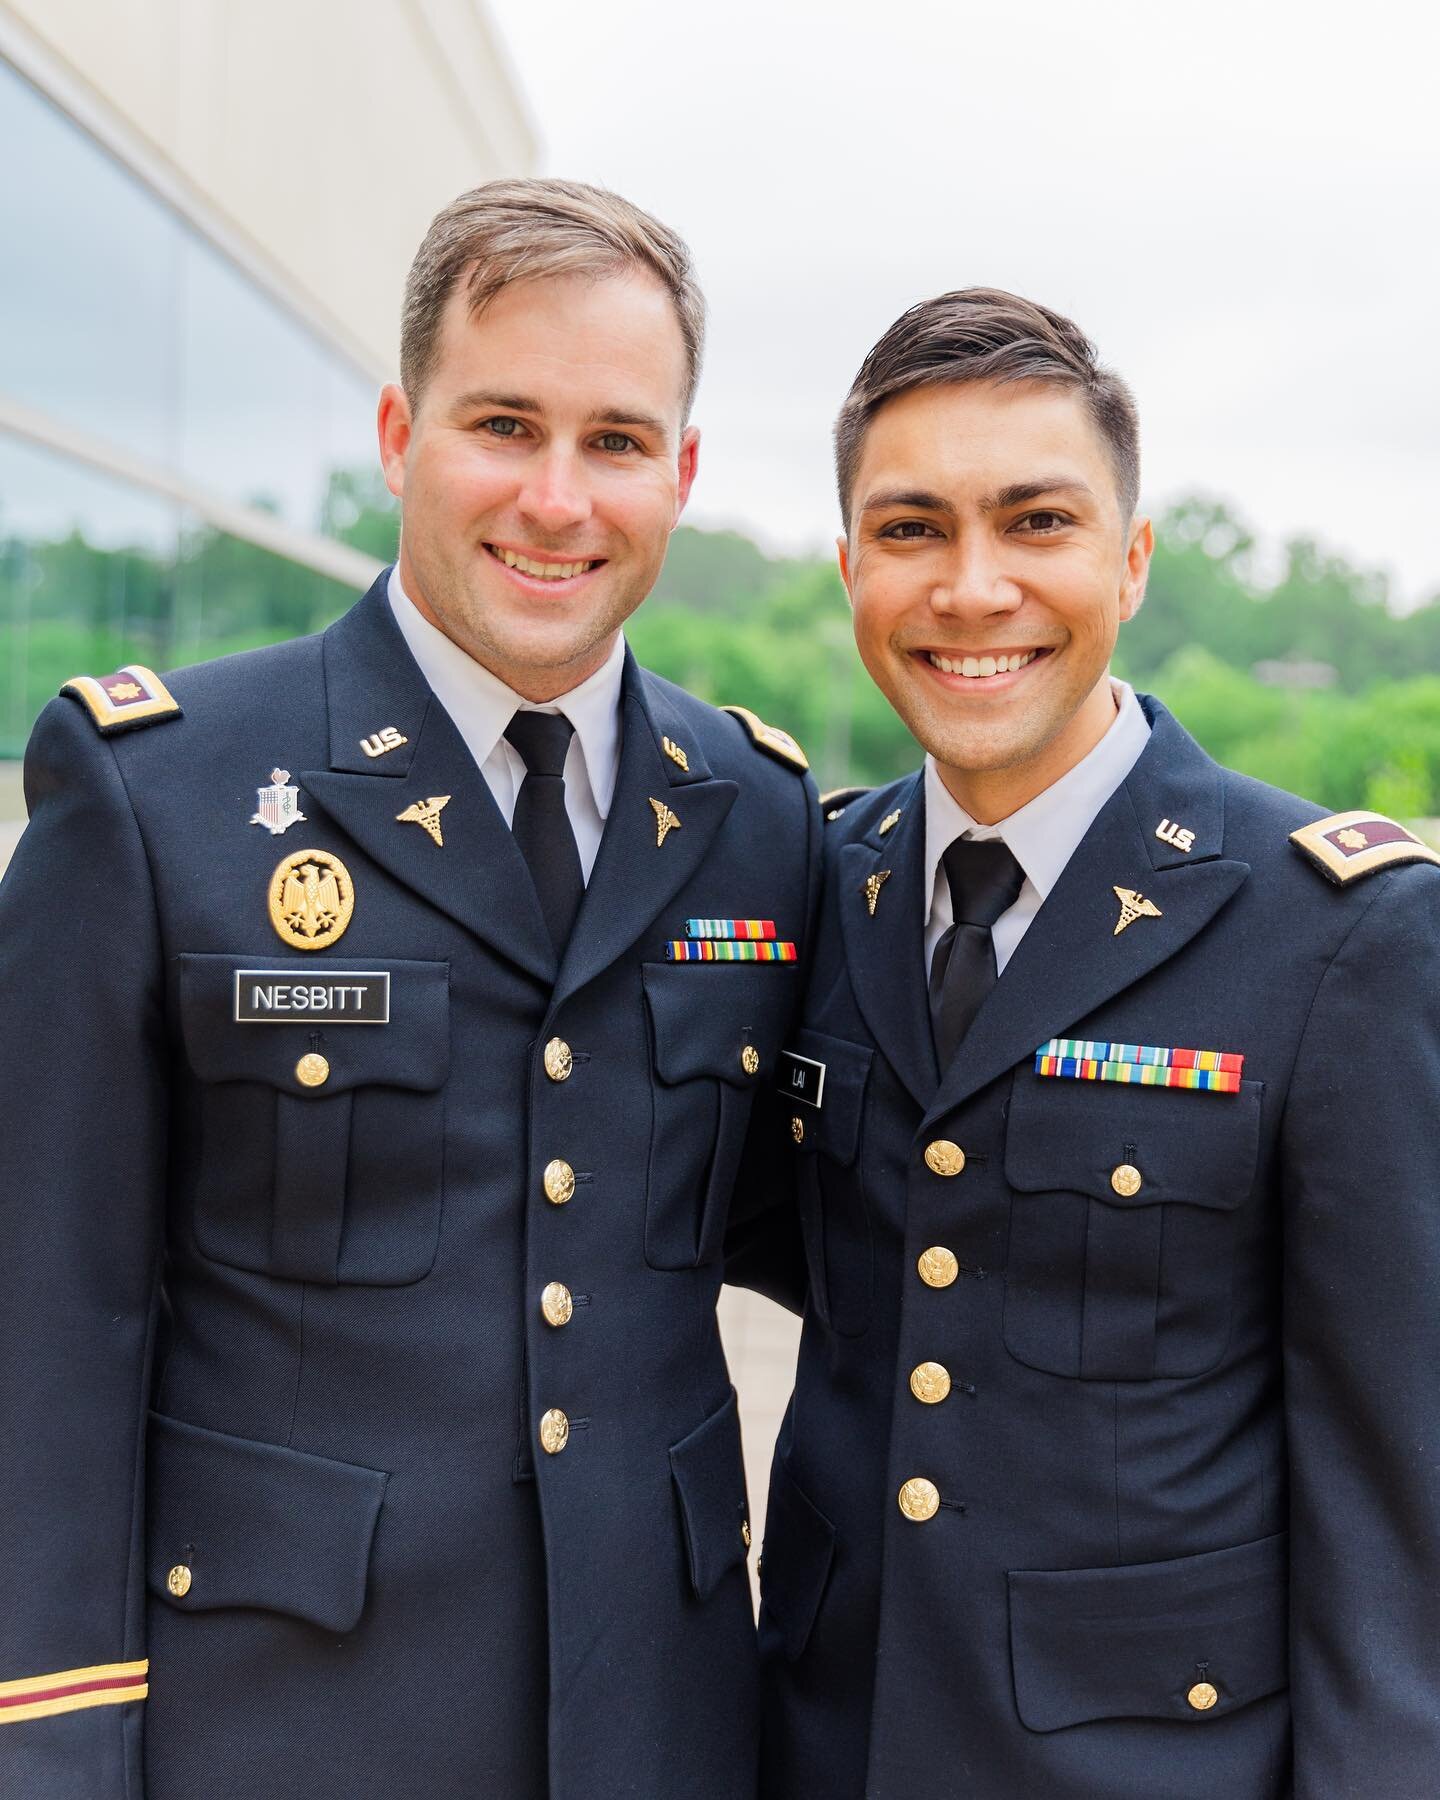 Congratulations to Major @gregorylai_md and Major @blaine.nesbitt ! Yesterday&rsquo;s ceremony was a MAJOR deal. So happy these two could be honored together after serving for the last 10 years. Started at @usuhealthsci as medical students and now bo